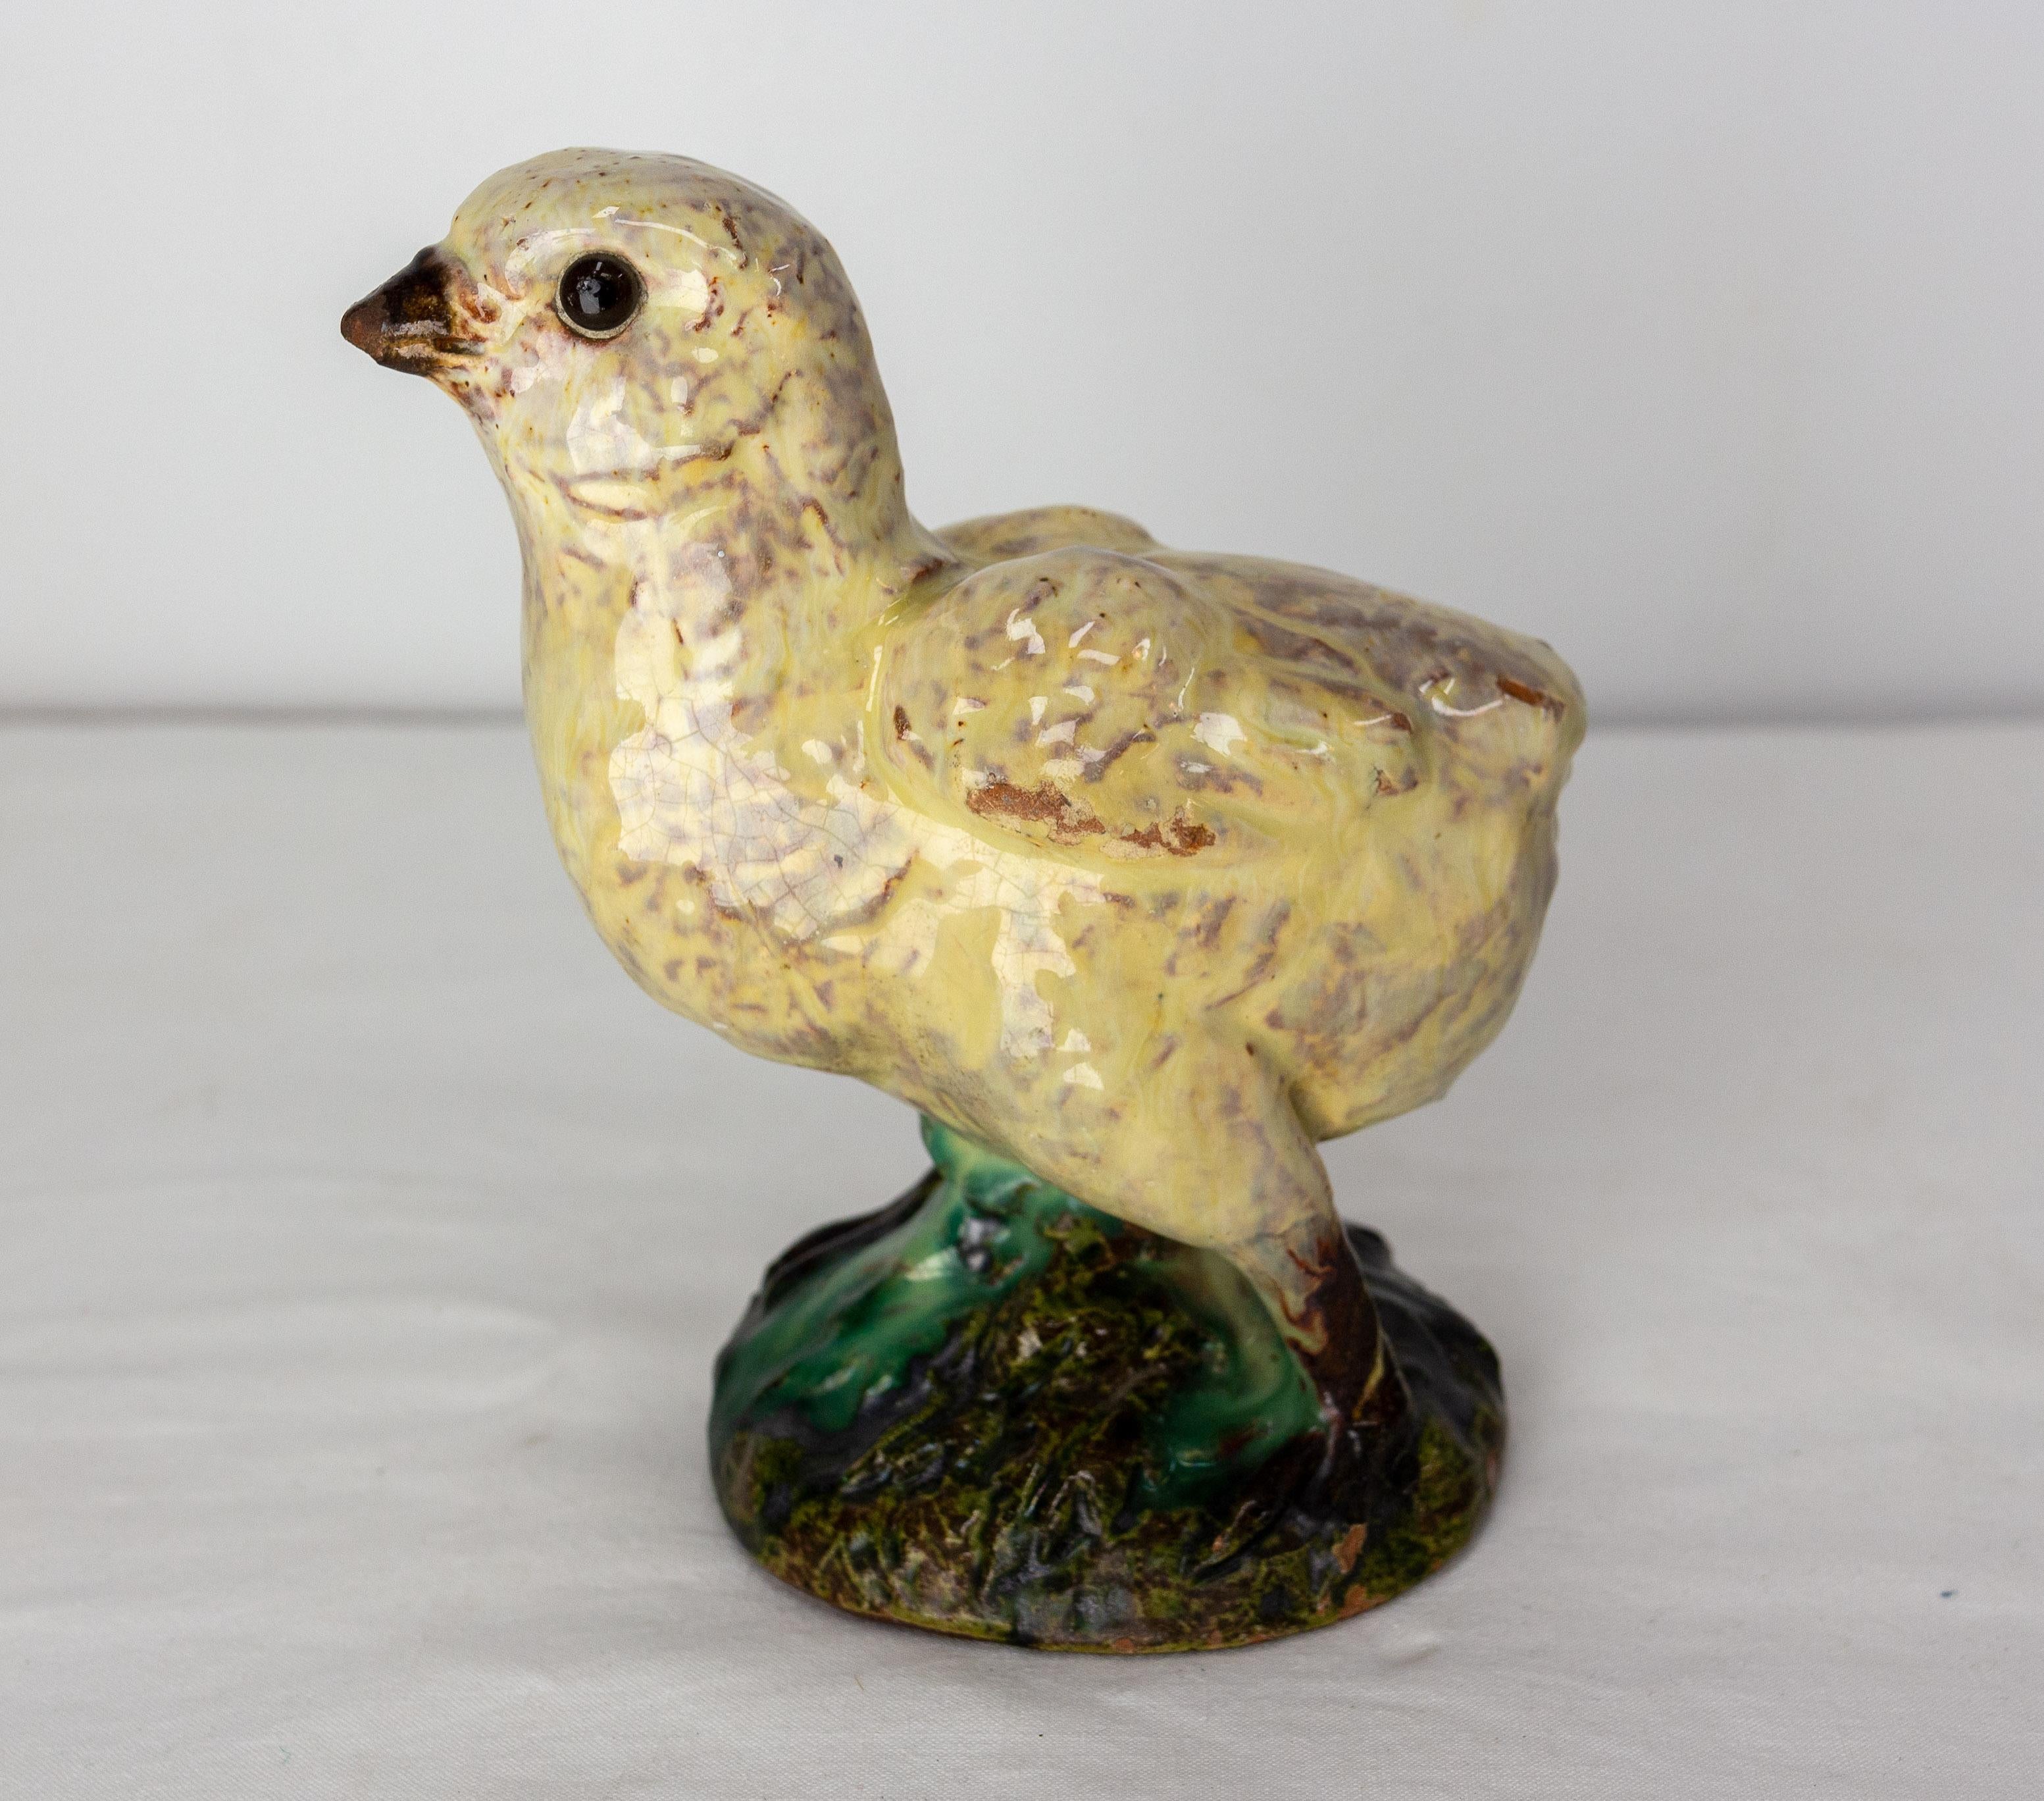 French Terracotta recovered of faience representing a chick
Signed by Joseph Filmont ceramicist in Caen, Normandy. He created at the end of the 19th century a pottery and architectural ceramics in his hometown.
Good condition, small age changes on